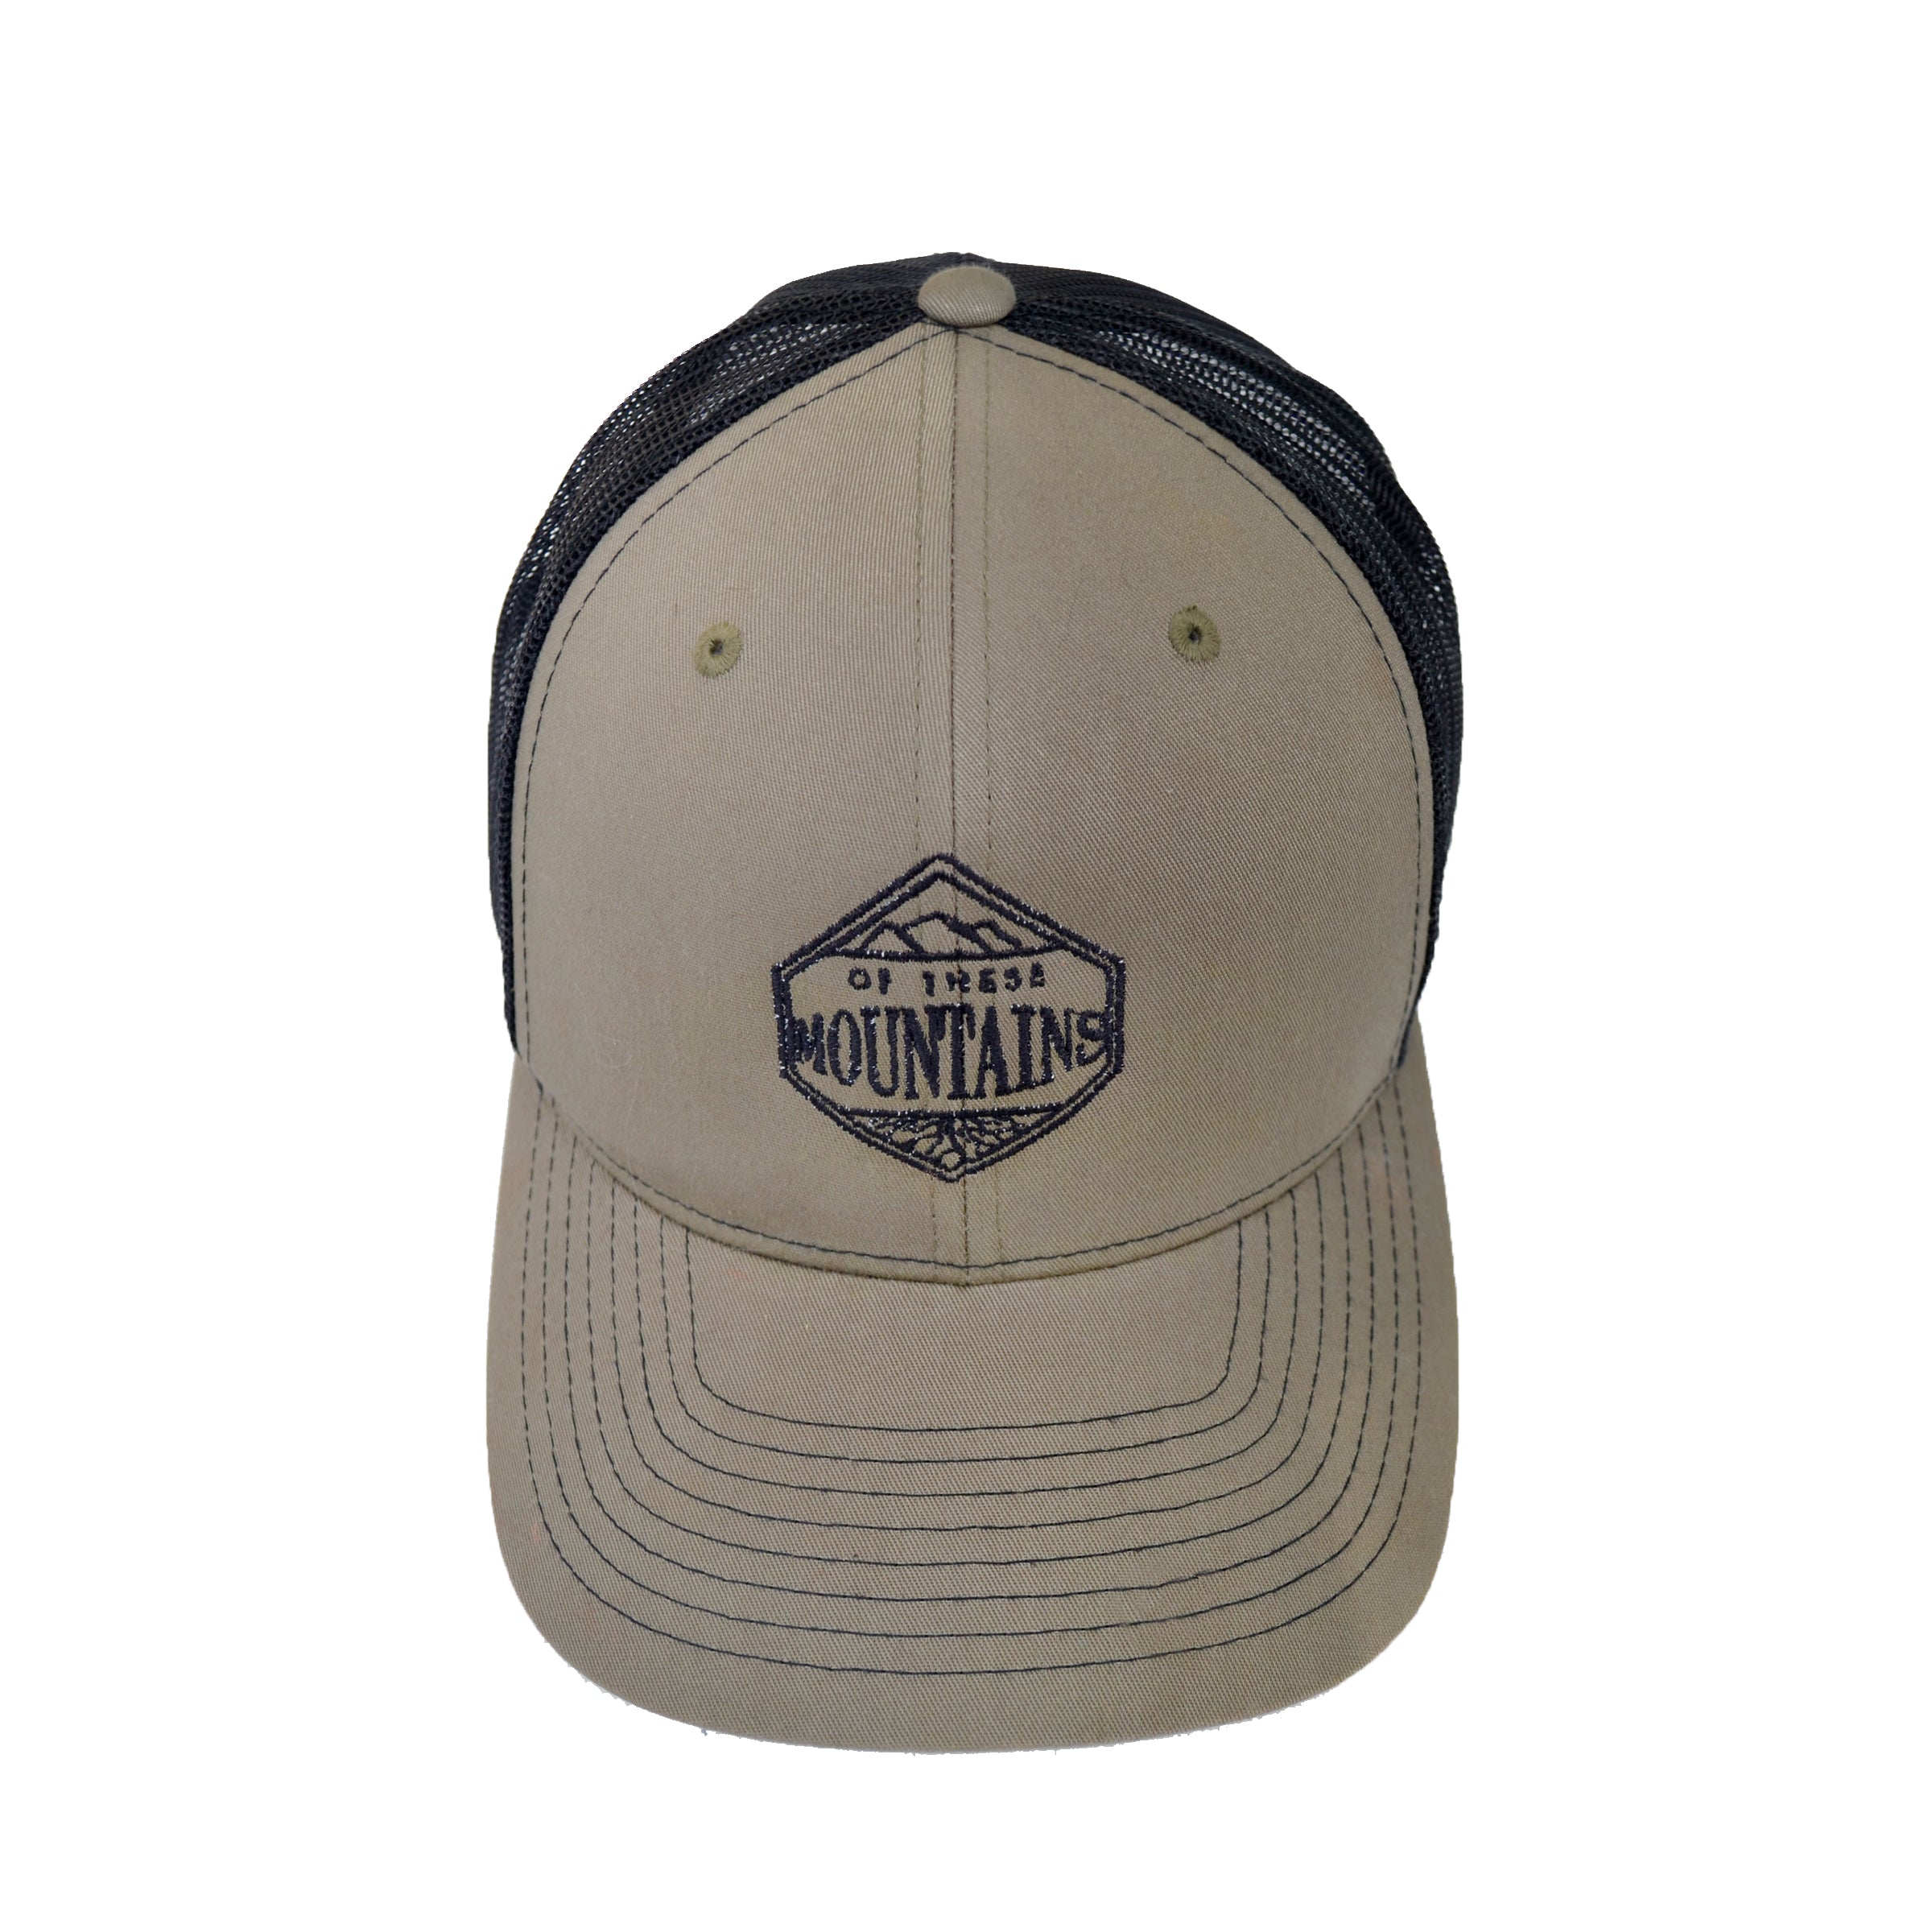 Of These Mountains Mountains are Waiting Trucker Hat